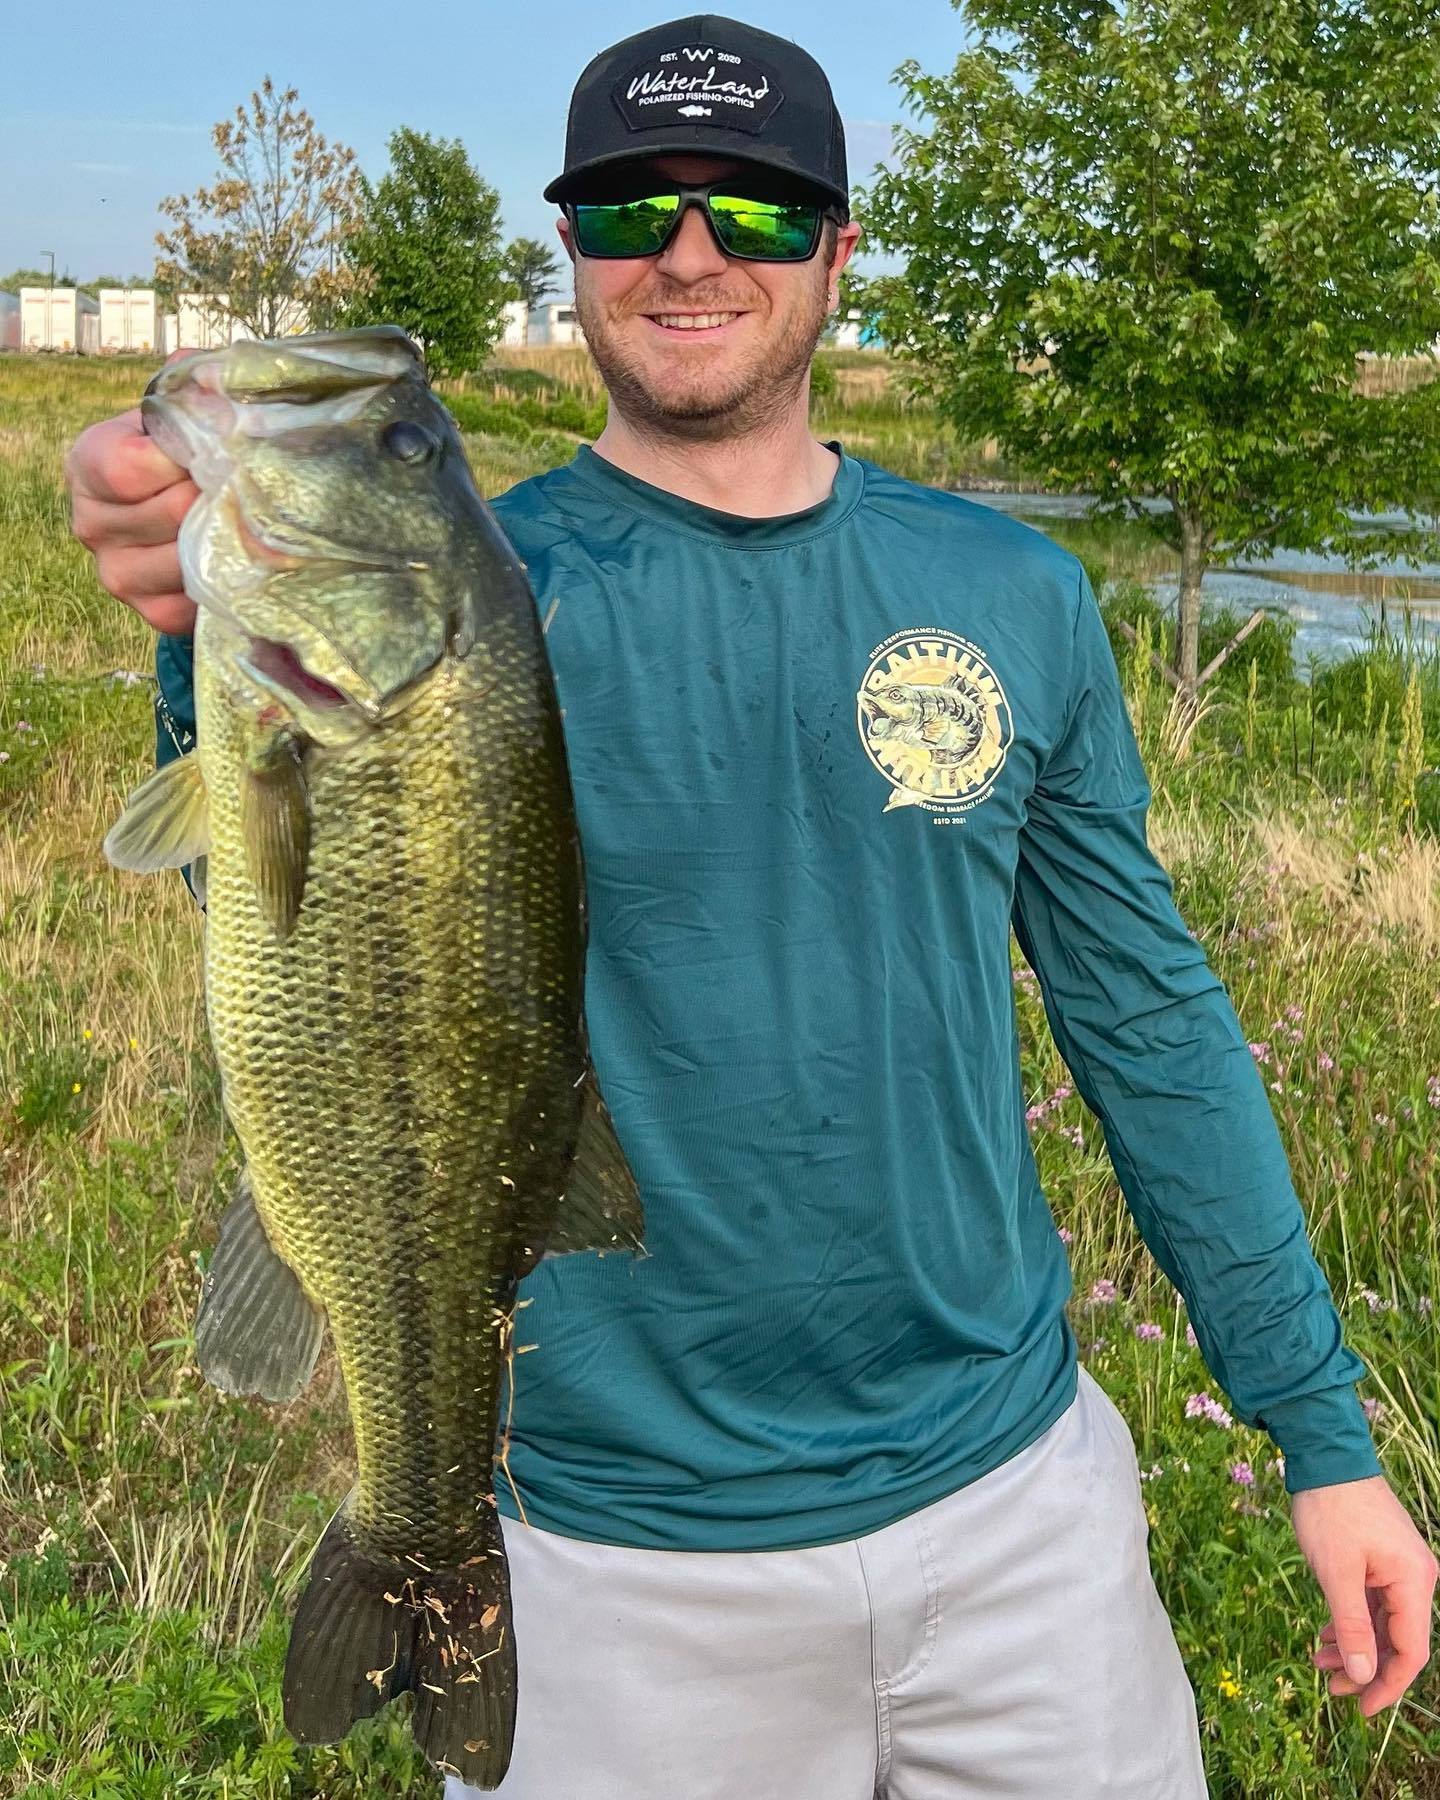 Get to know Bud Eveigan (@bud_the_angler)